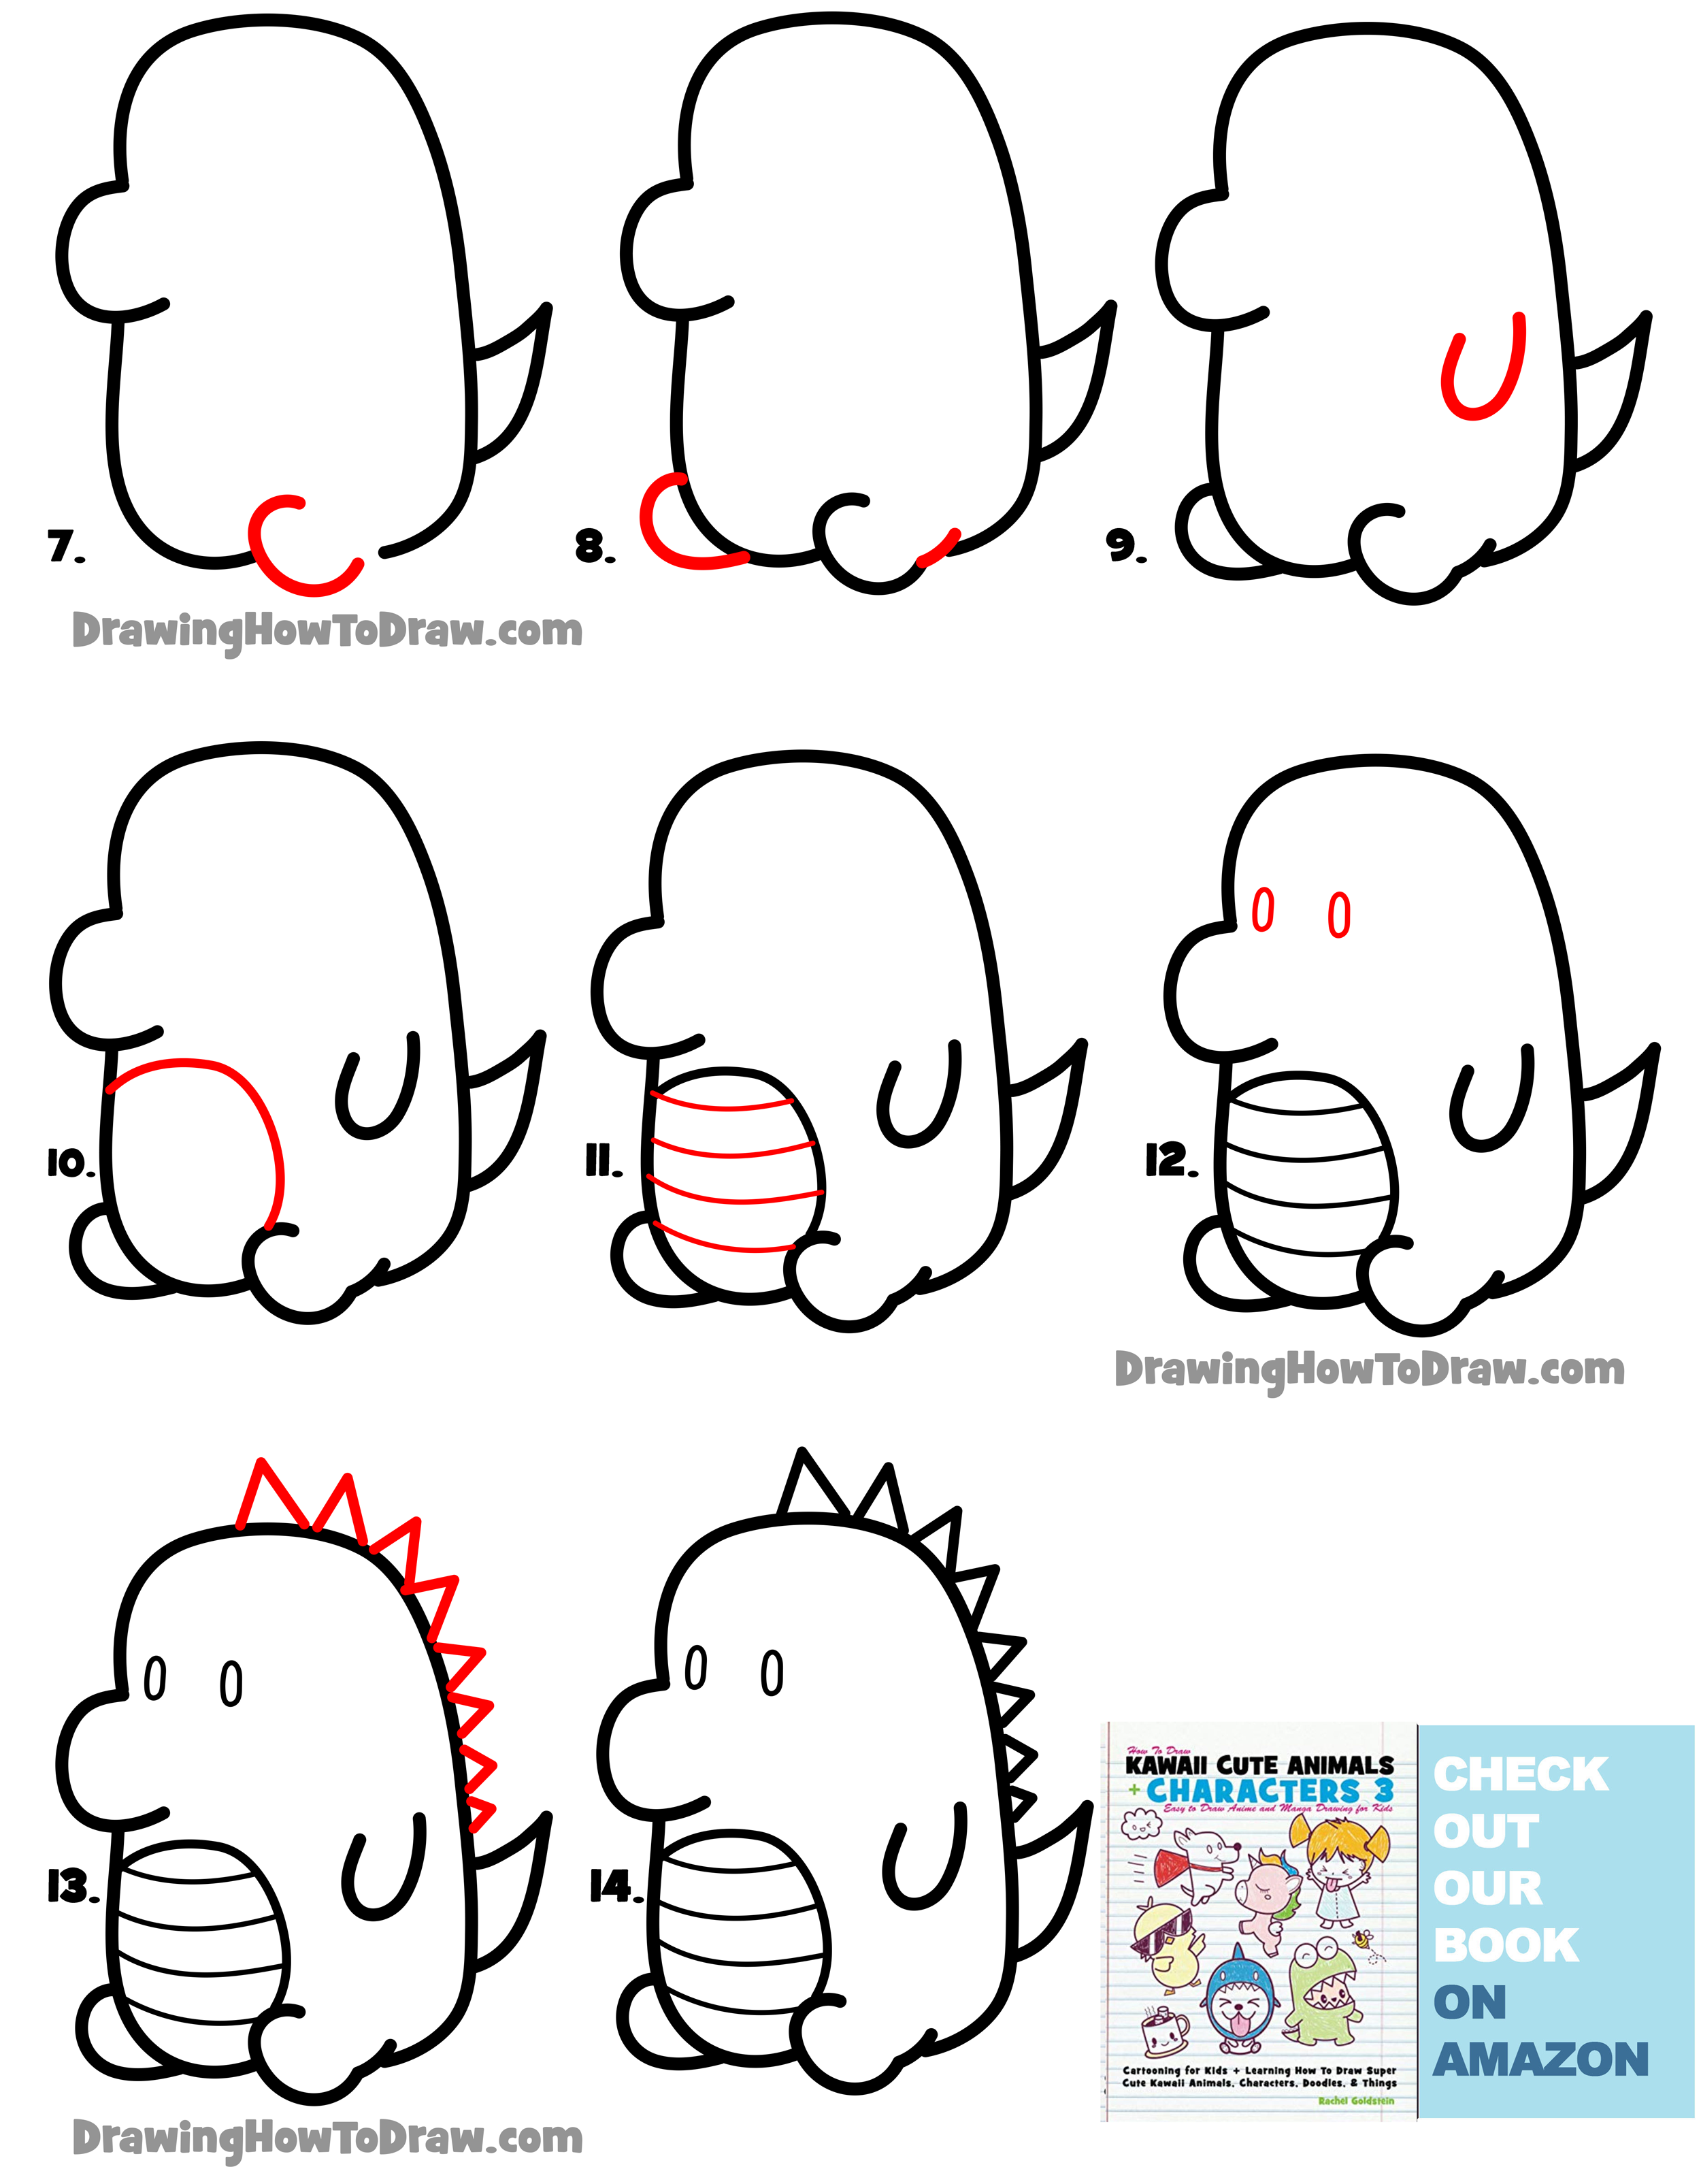 How to Draw a Cute Dinosaur (Kawaii / Chibi) Easy Step-by-Step Drawing Tutorial for Kids